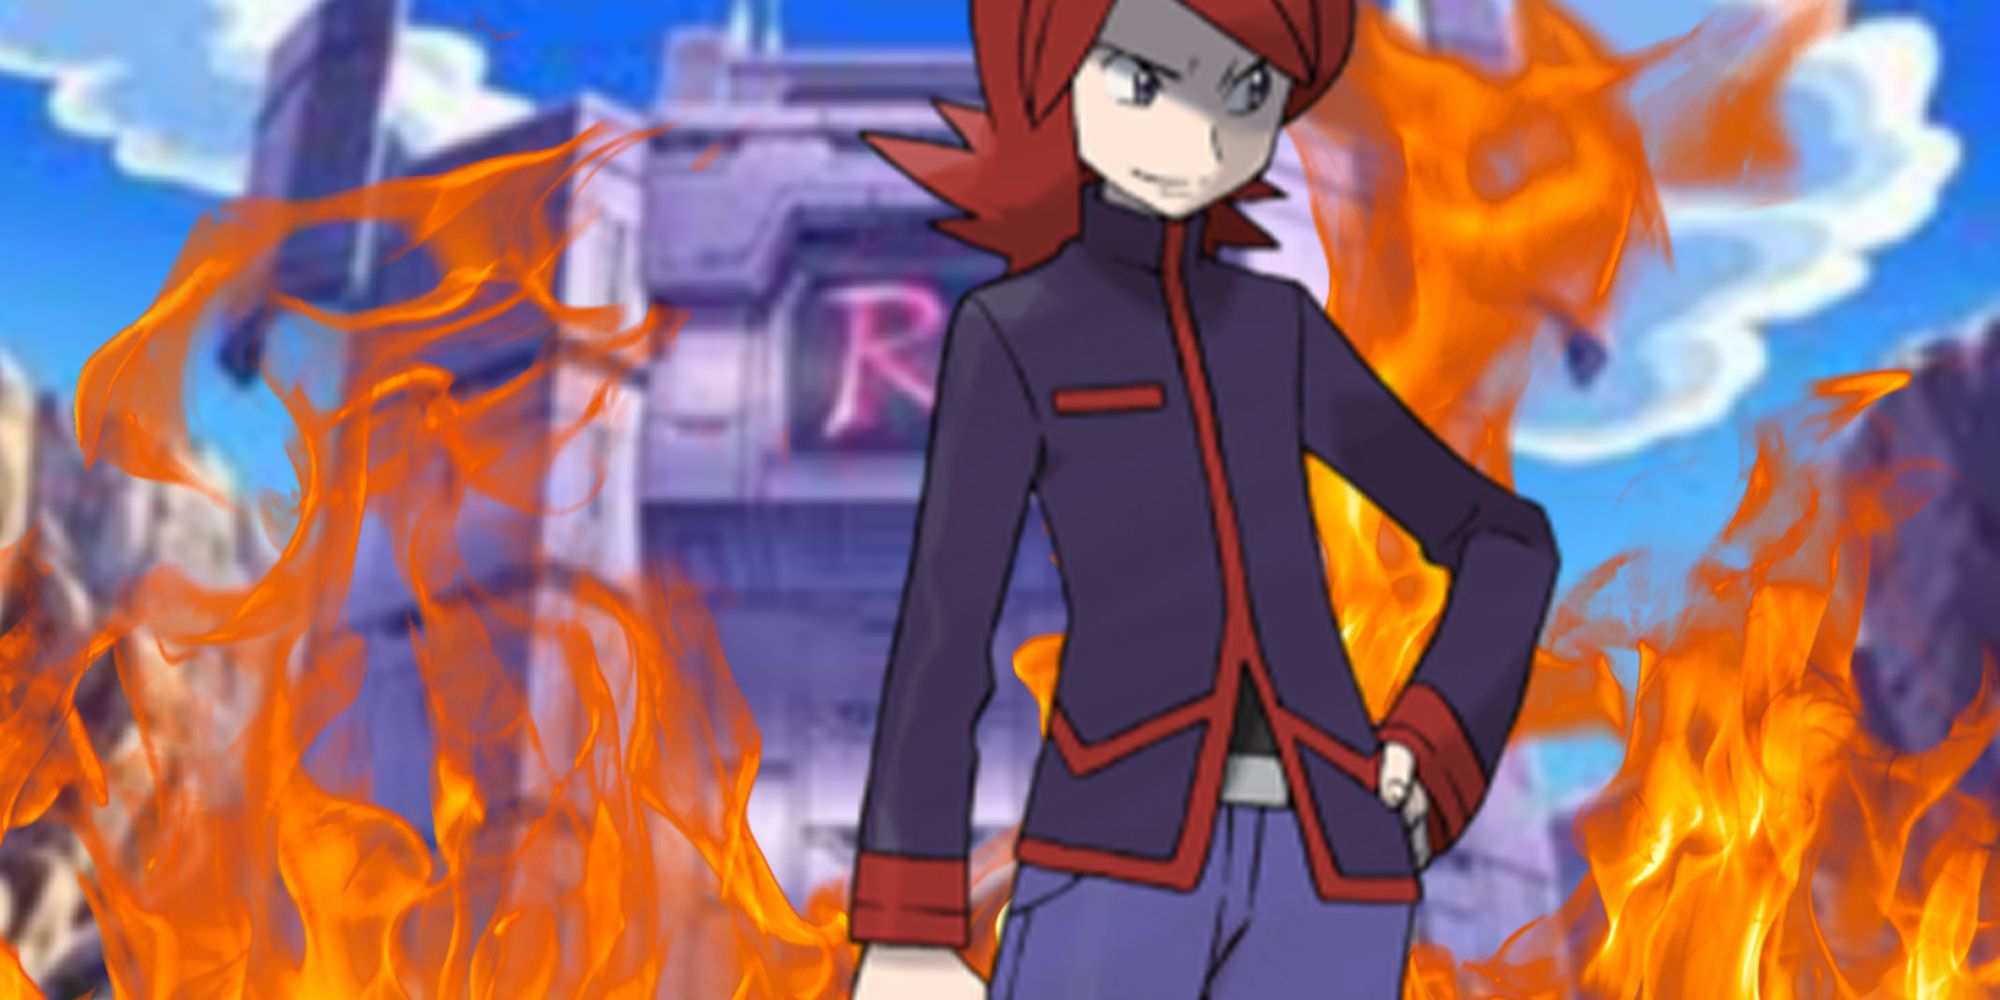 Team Rocket HQ On Fire with silver standing smugly in front of it